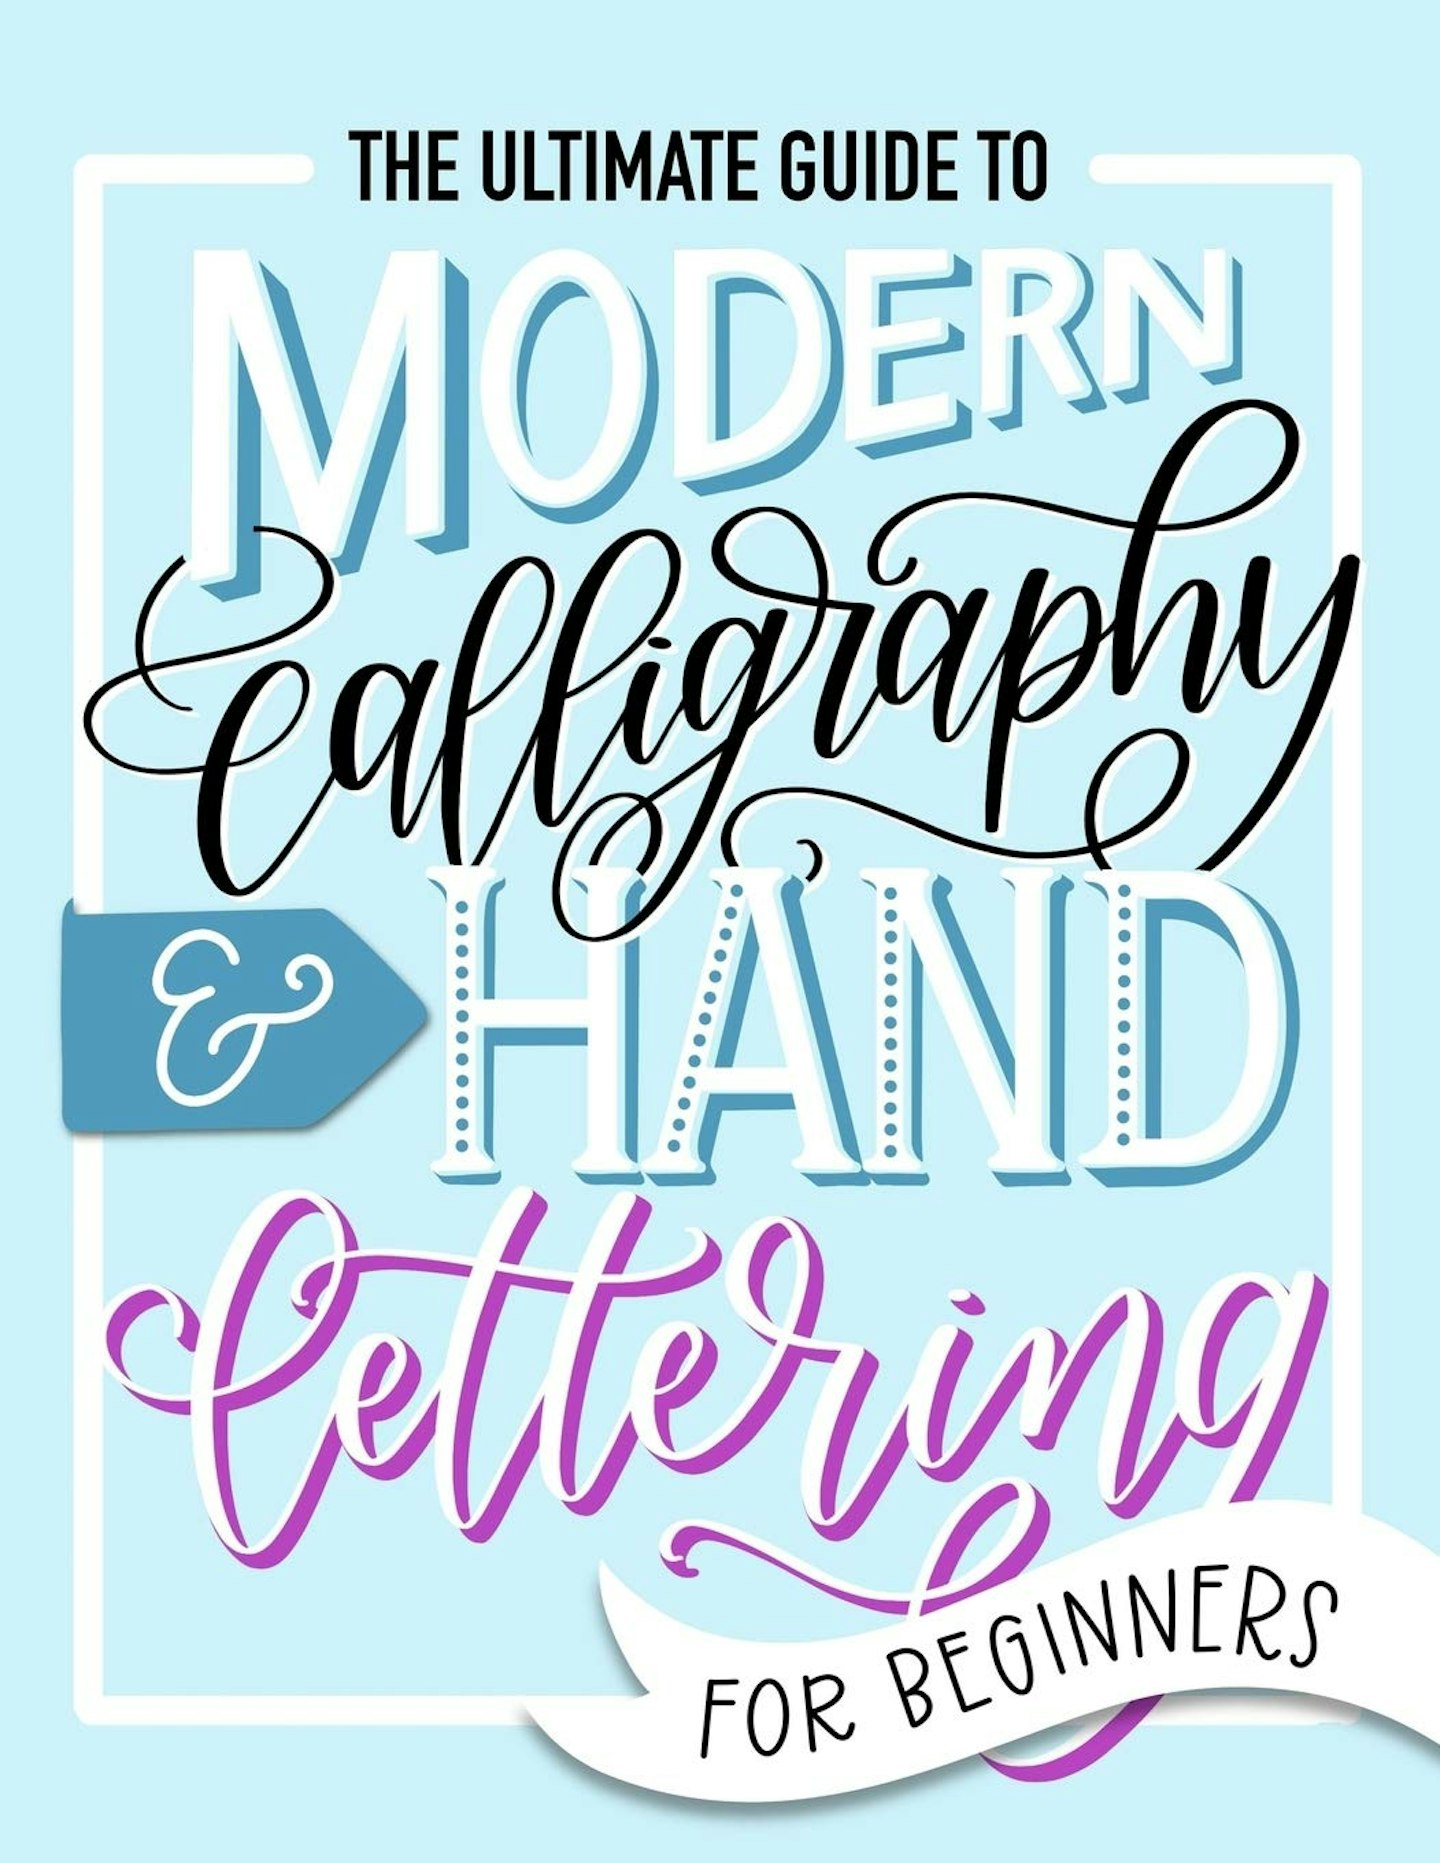 The Ultimate Guide to Modern Calligraphy & Hand Lettering by June and Lucy